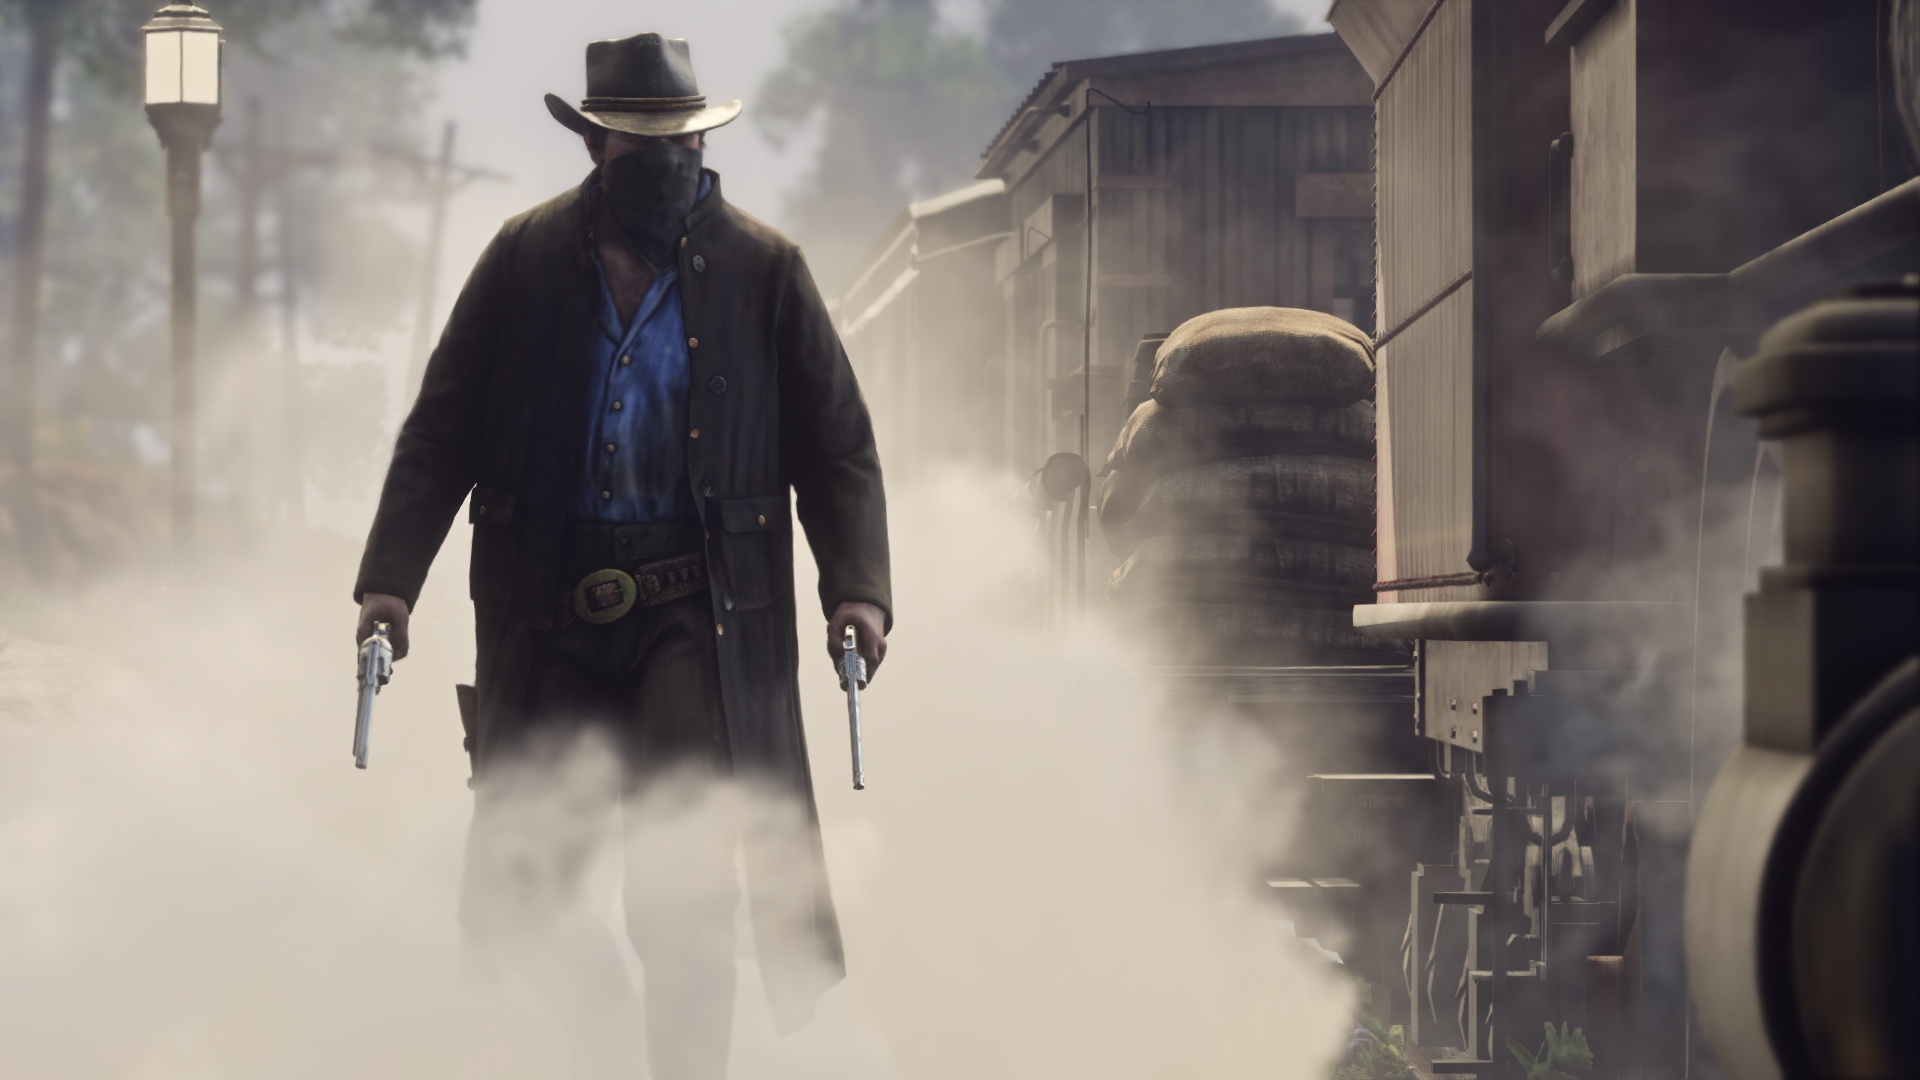 Epic Games Store on X: Red Dead Redemption 2 for PC brings the epic story  of Arthur Morgan and the Van der Linde gang to life in breathtaking new  ways. Pre-purchase is